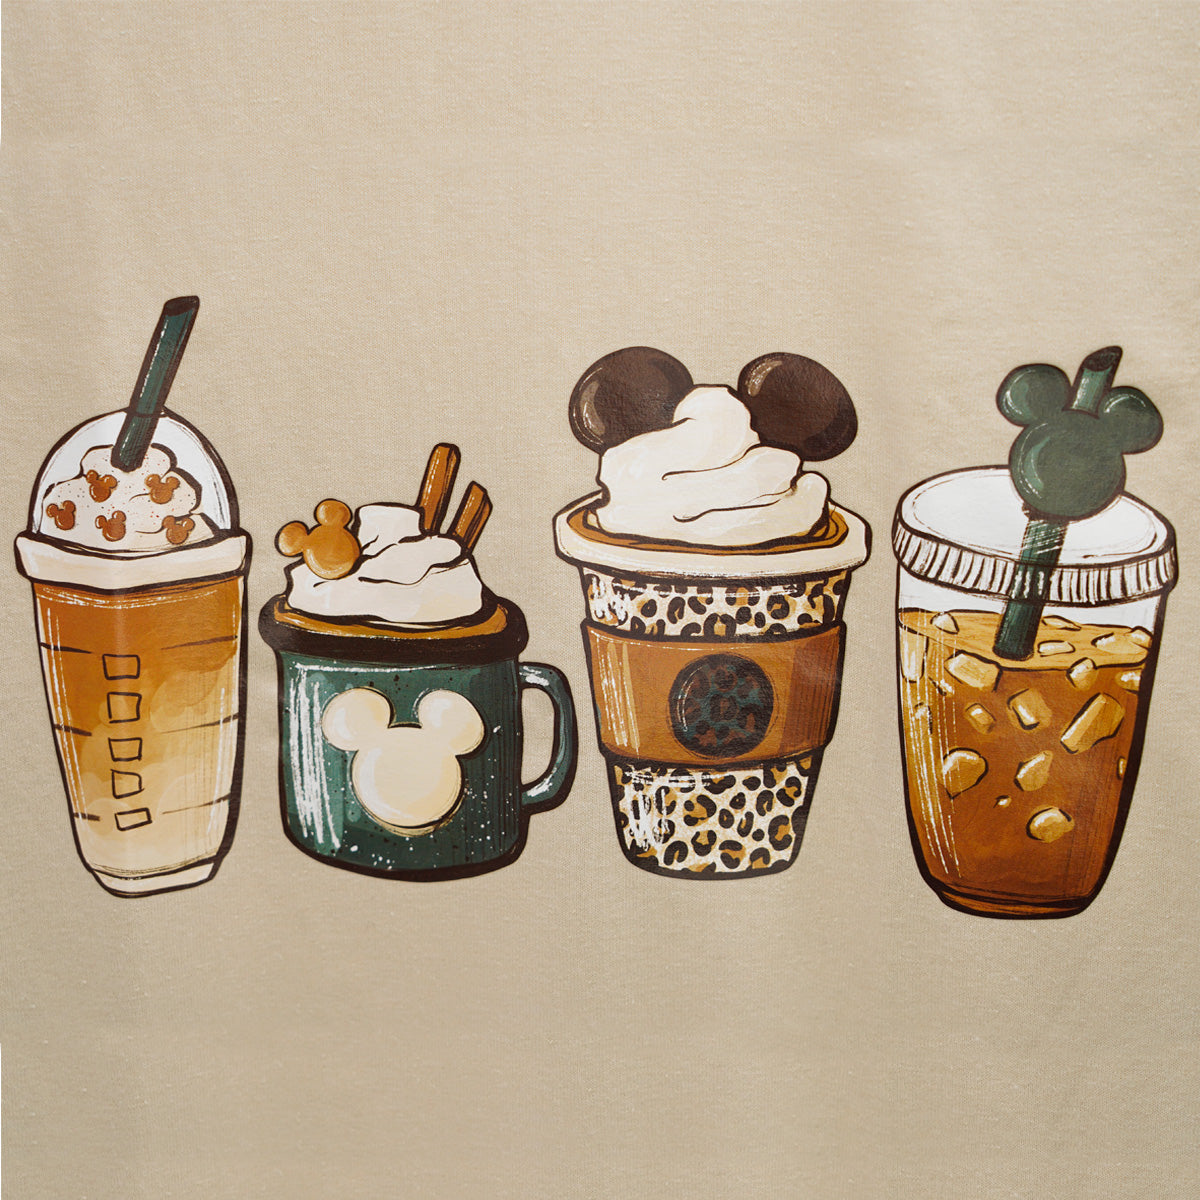 Mouse Ears & Coffee - Locally Pressed Dryblend T-Shirt